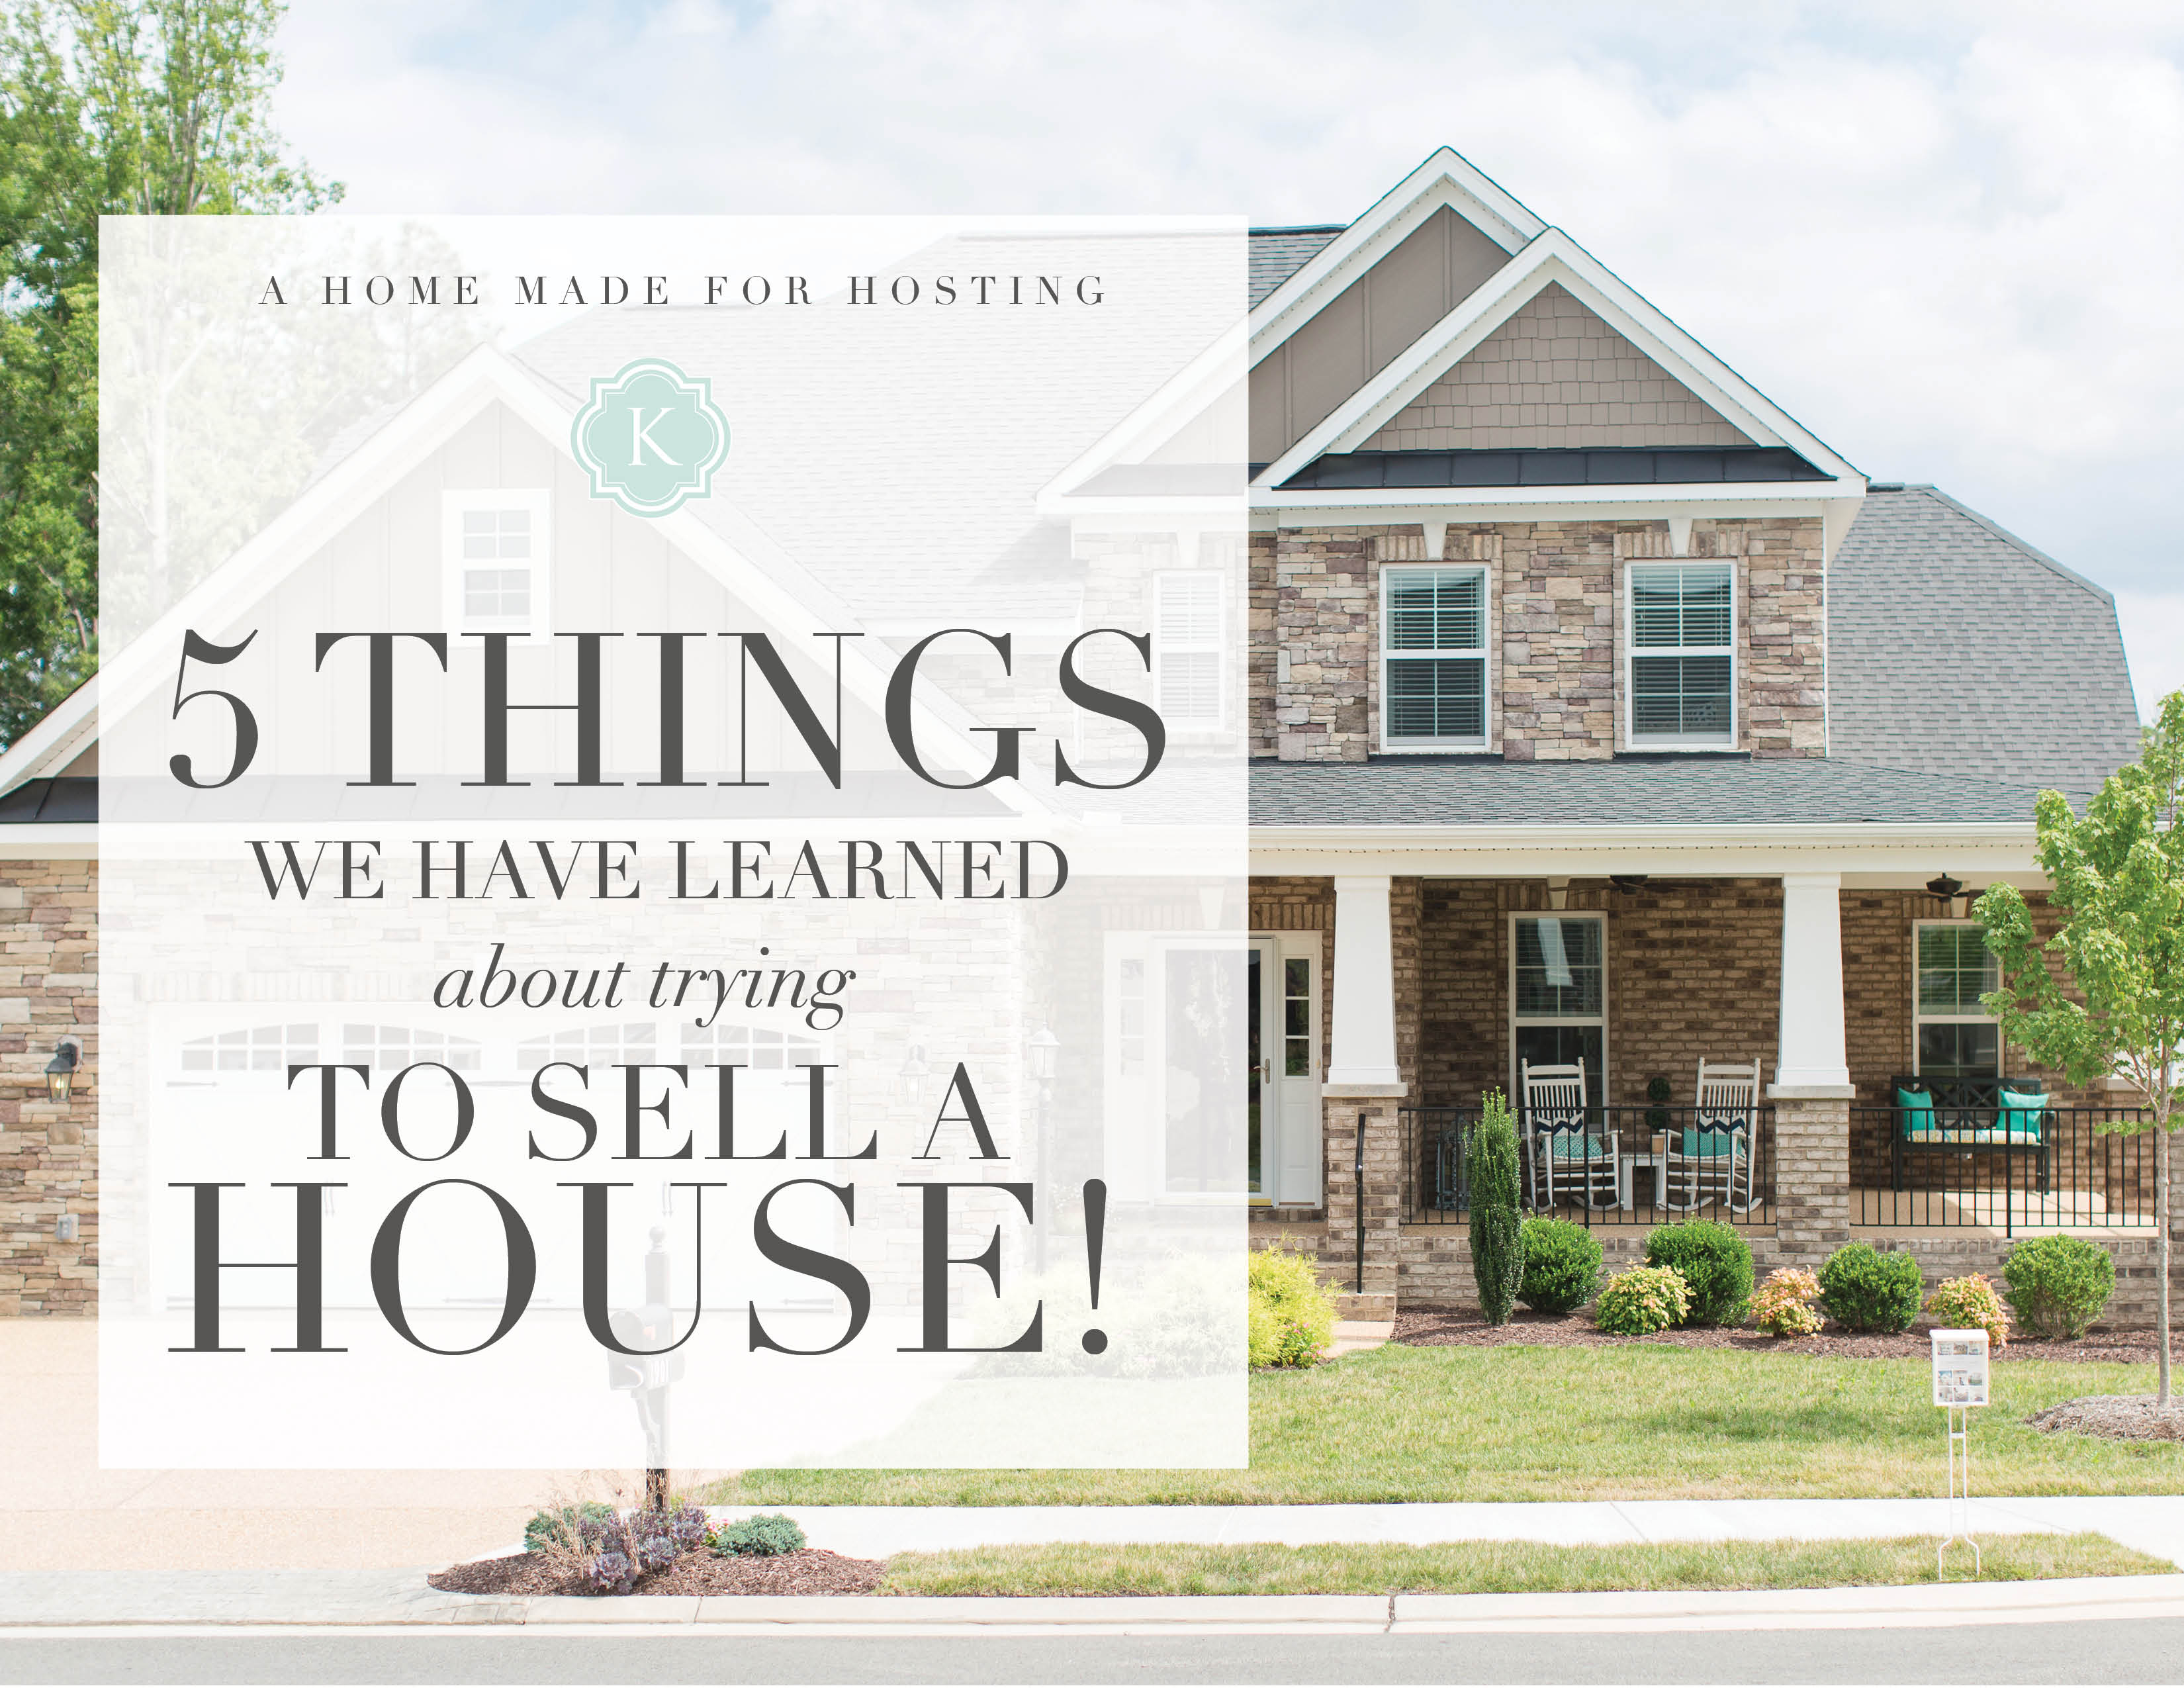 5 Things We’ve Learned About Selling a House